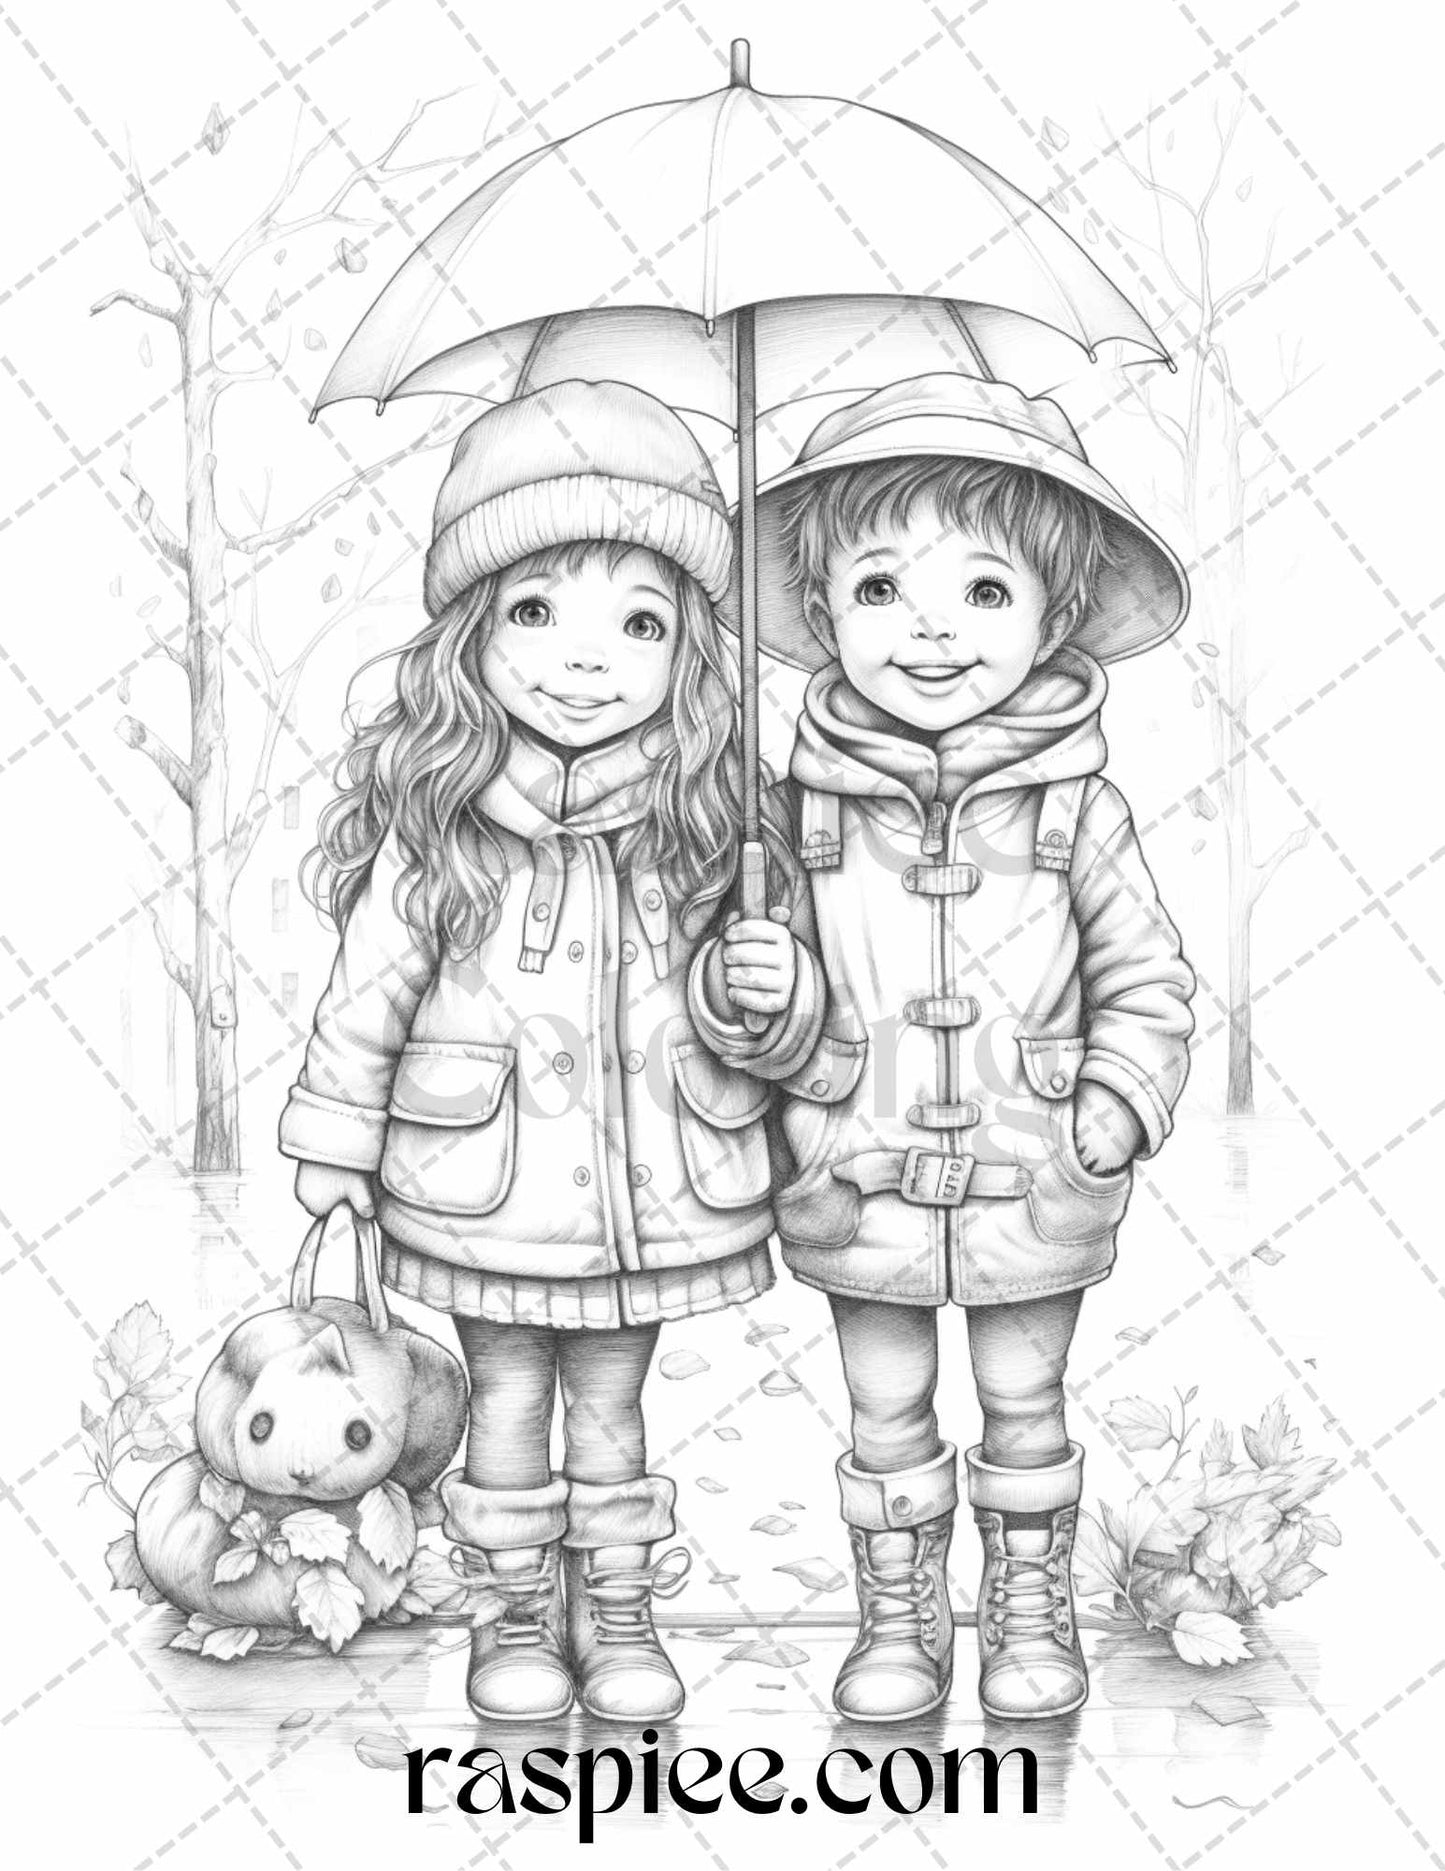 Autumn Coloring Pages, Rainy Day Coloring Sheets, Adult and Kids Coloring, Fall Creative Projects, Relaxing Coloring Activities, Seasonal Art Therapy, Printable Coloring Fun, Autumn-Inspired Coloring Pages, DIY Coloring Templates, Printable Creative Ideas, Kids Coloring Pages, Relaxation Coloring Pages, Fall Coloring Pages